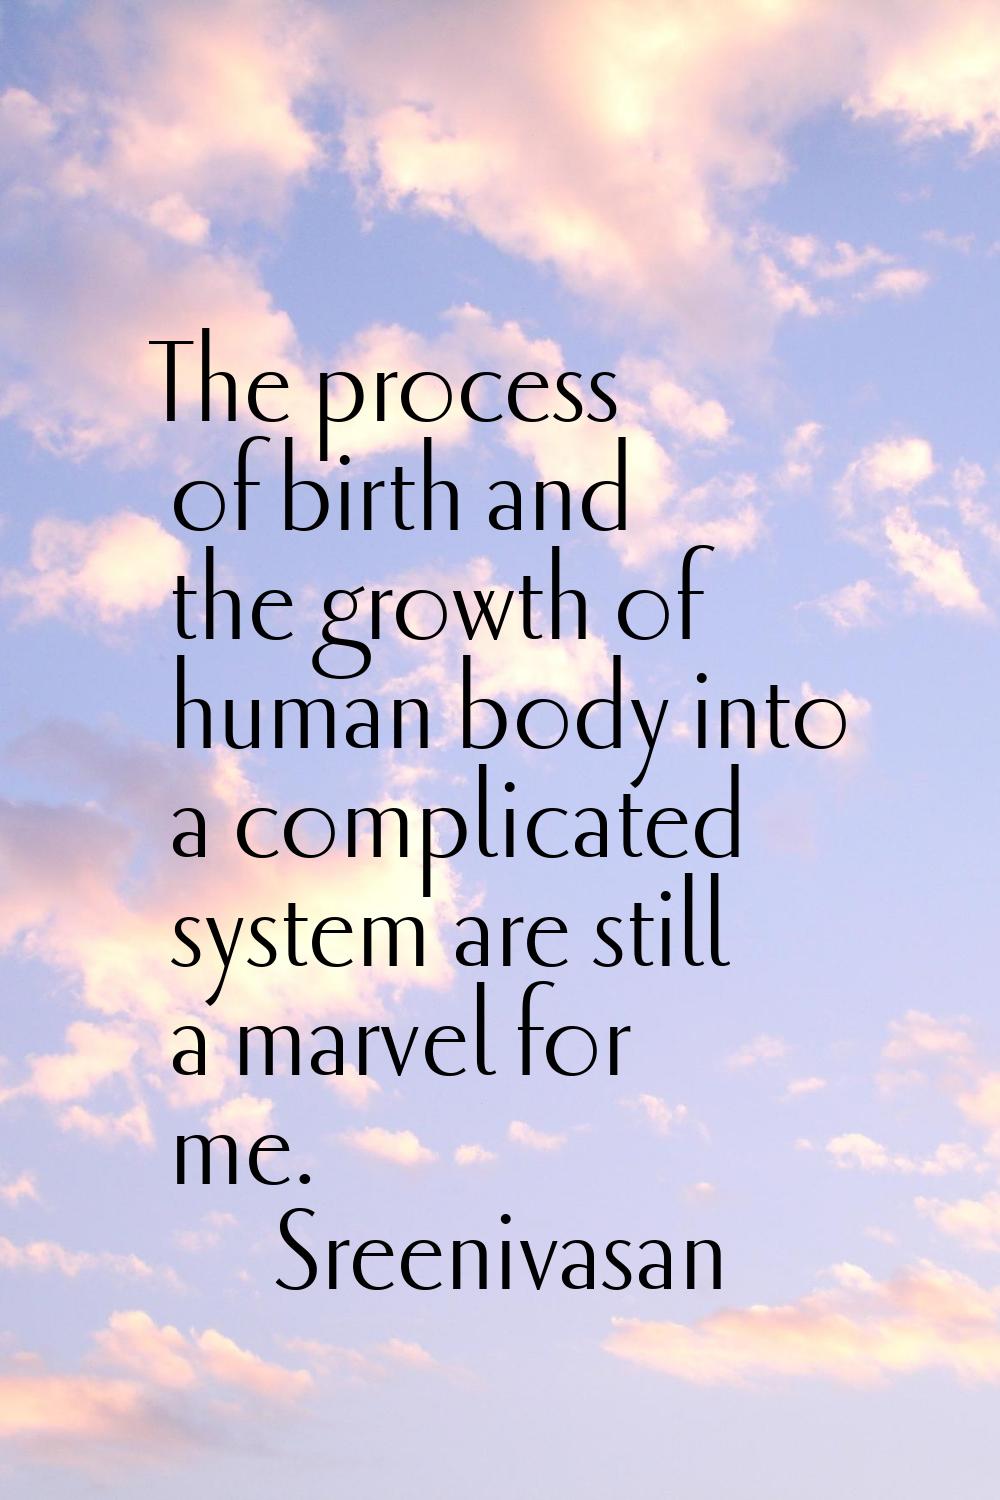 The process of birth and the growth of human body into a complicated system are still a marvel for 